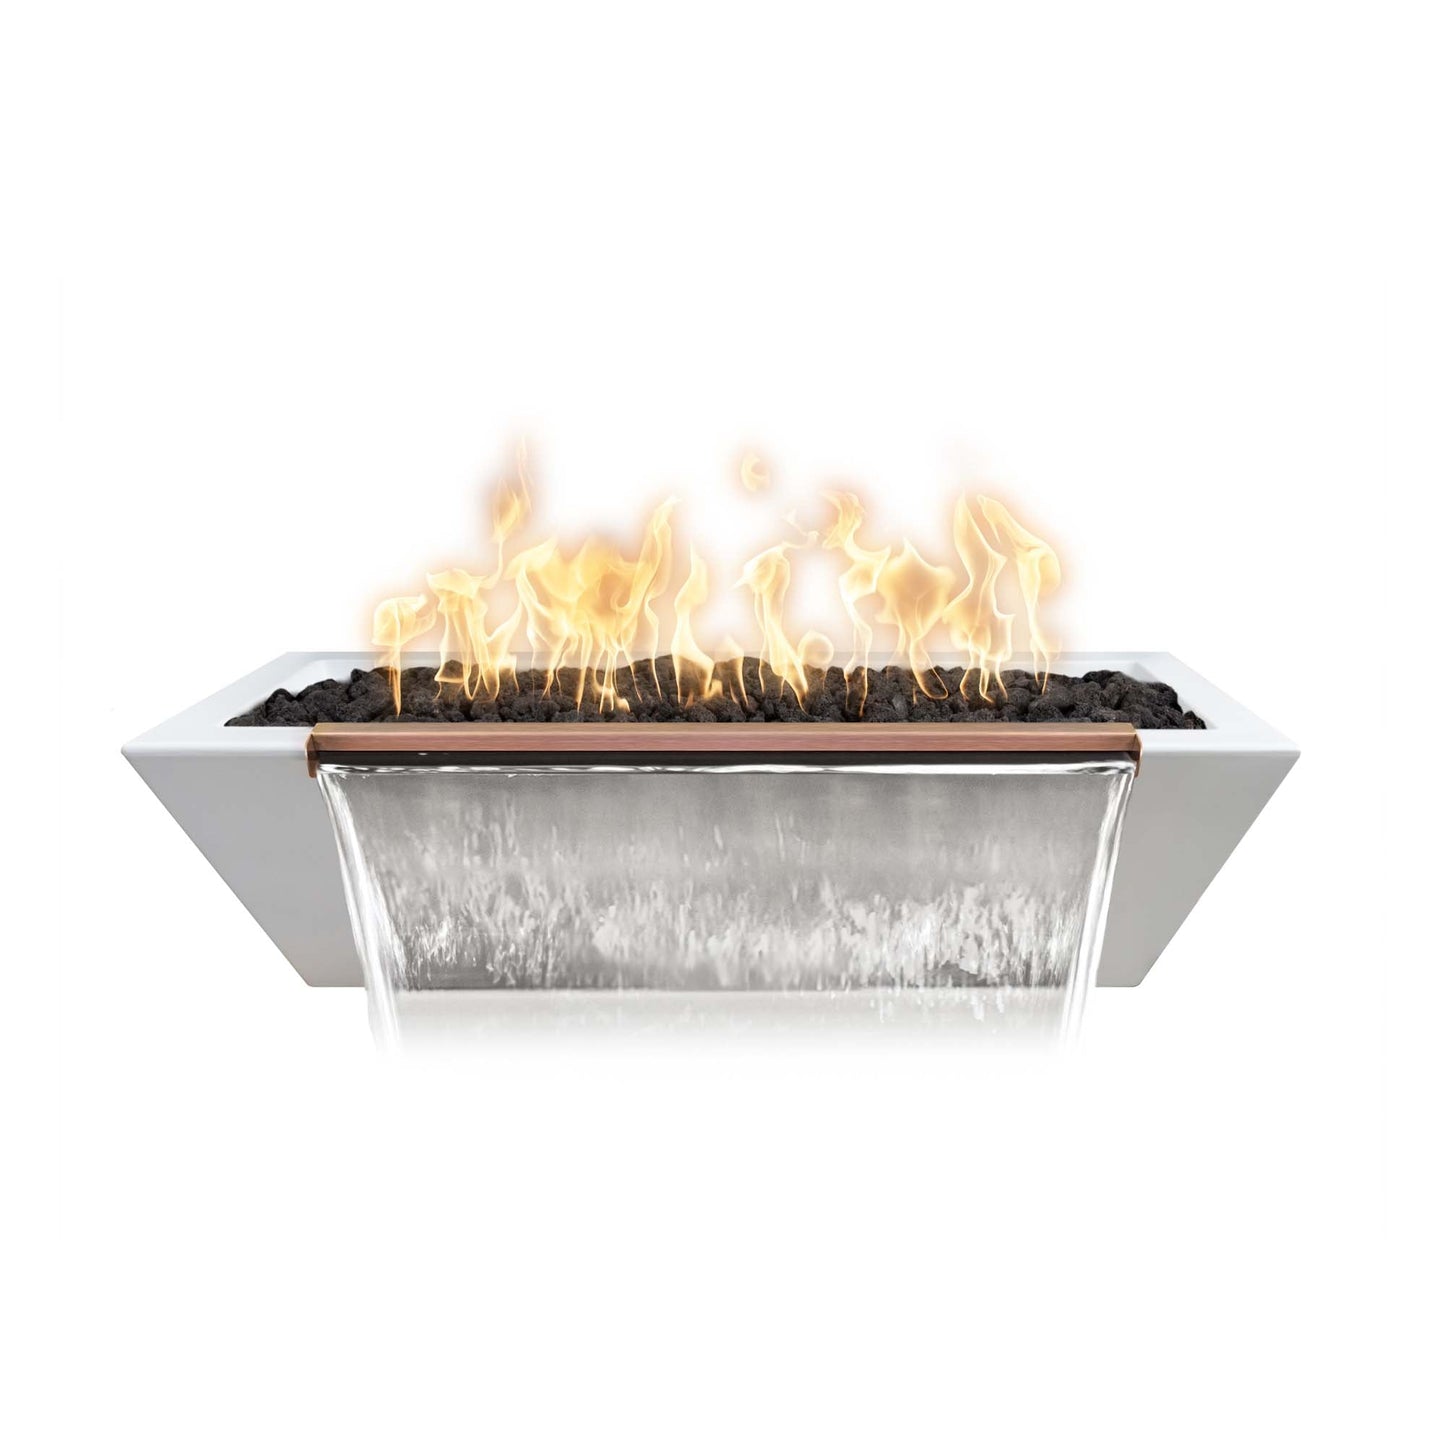 The Outdoor Plus Linear Maya 60" White GFRC Concrete Natural Gas Fire & Water Bowl with Match Lit with Flame Sense Ignition